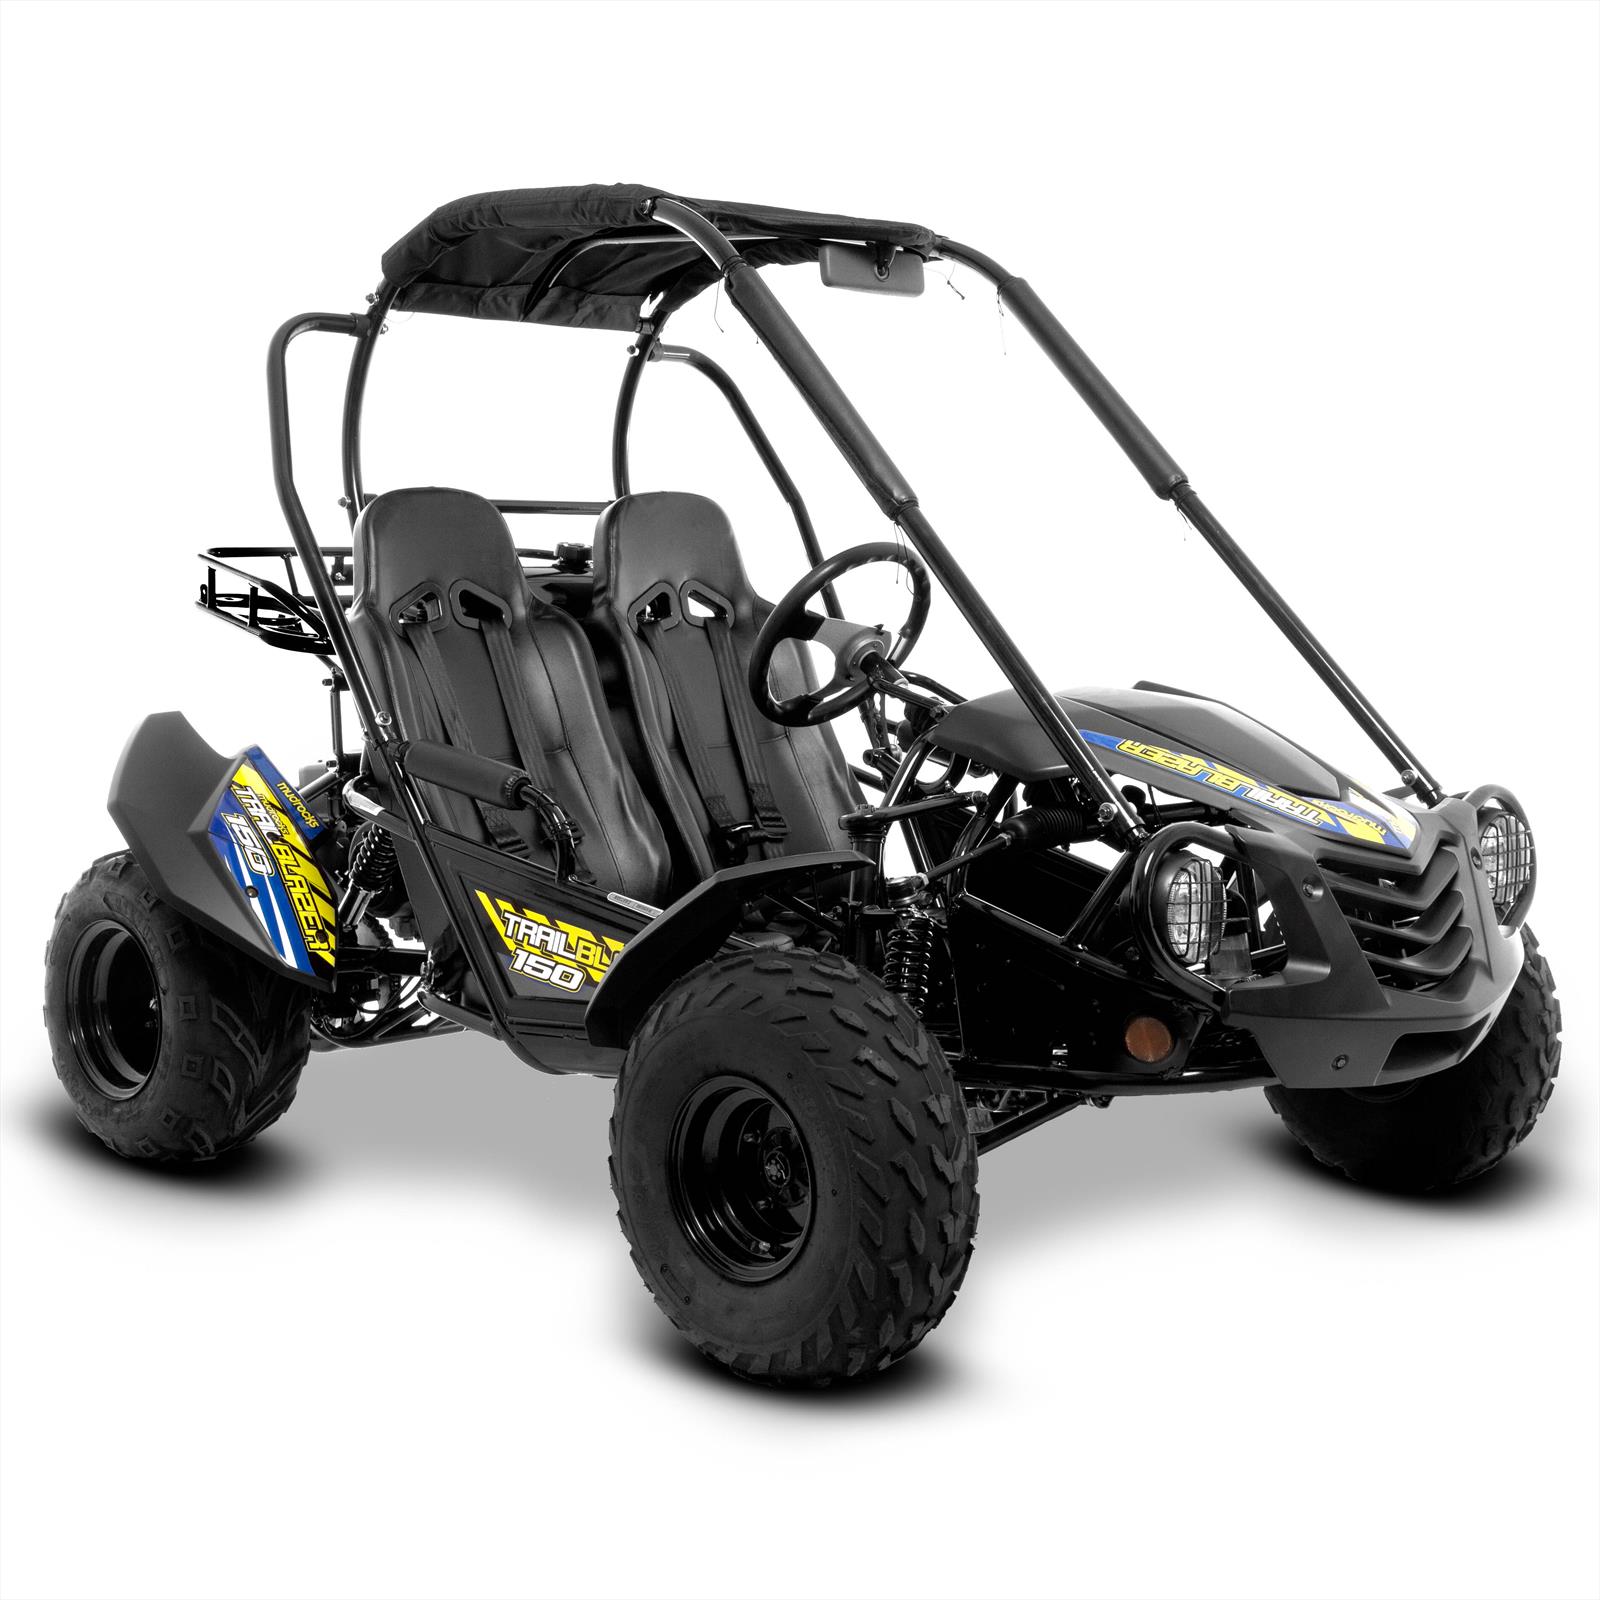 off road buggy for sale uk